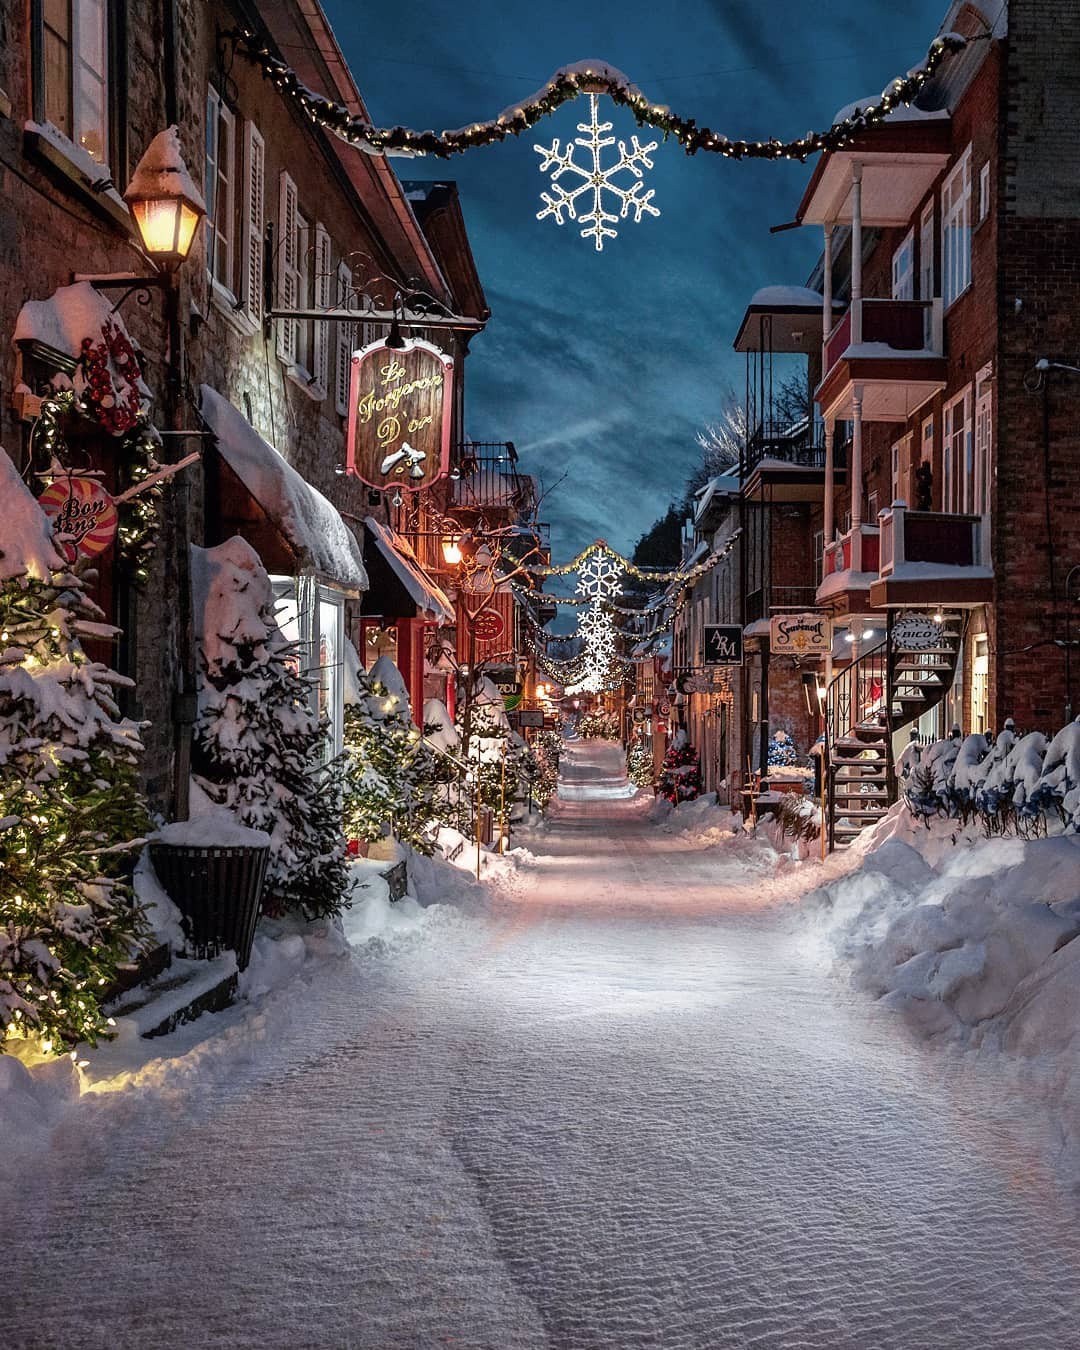 During the Christmas season in Quebec City, a wide array of festive activities and events take place, making it a truly magical destination.